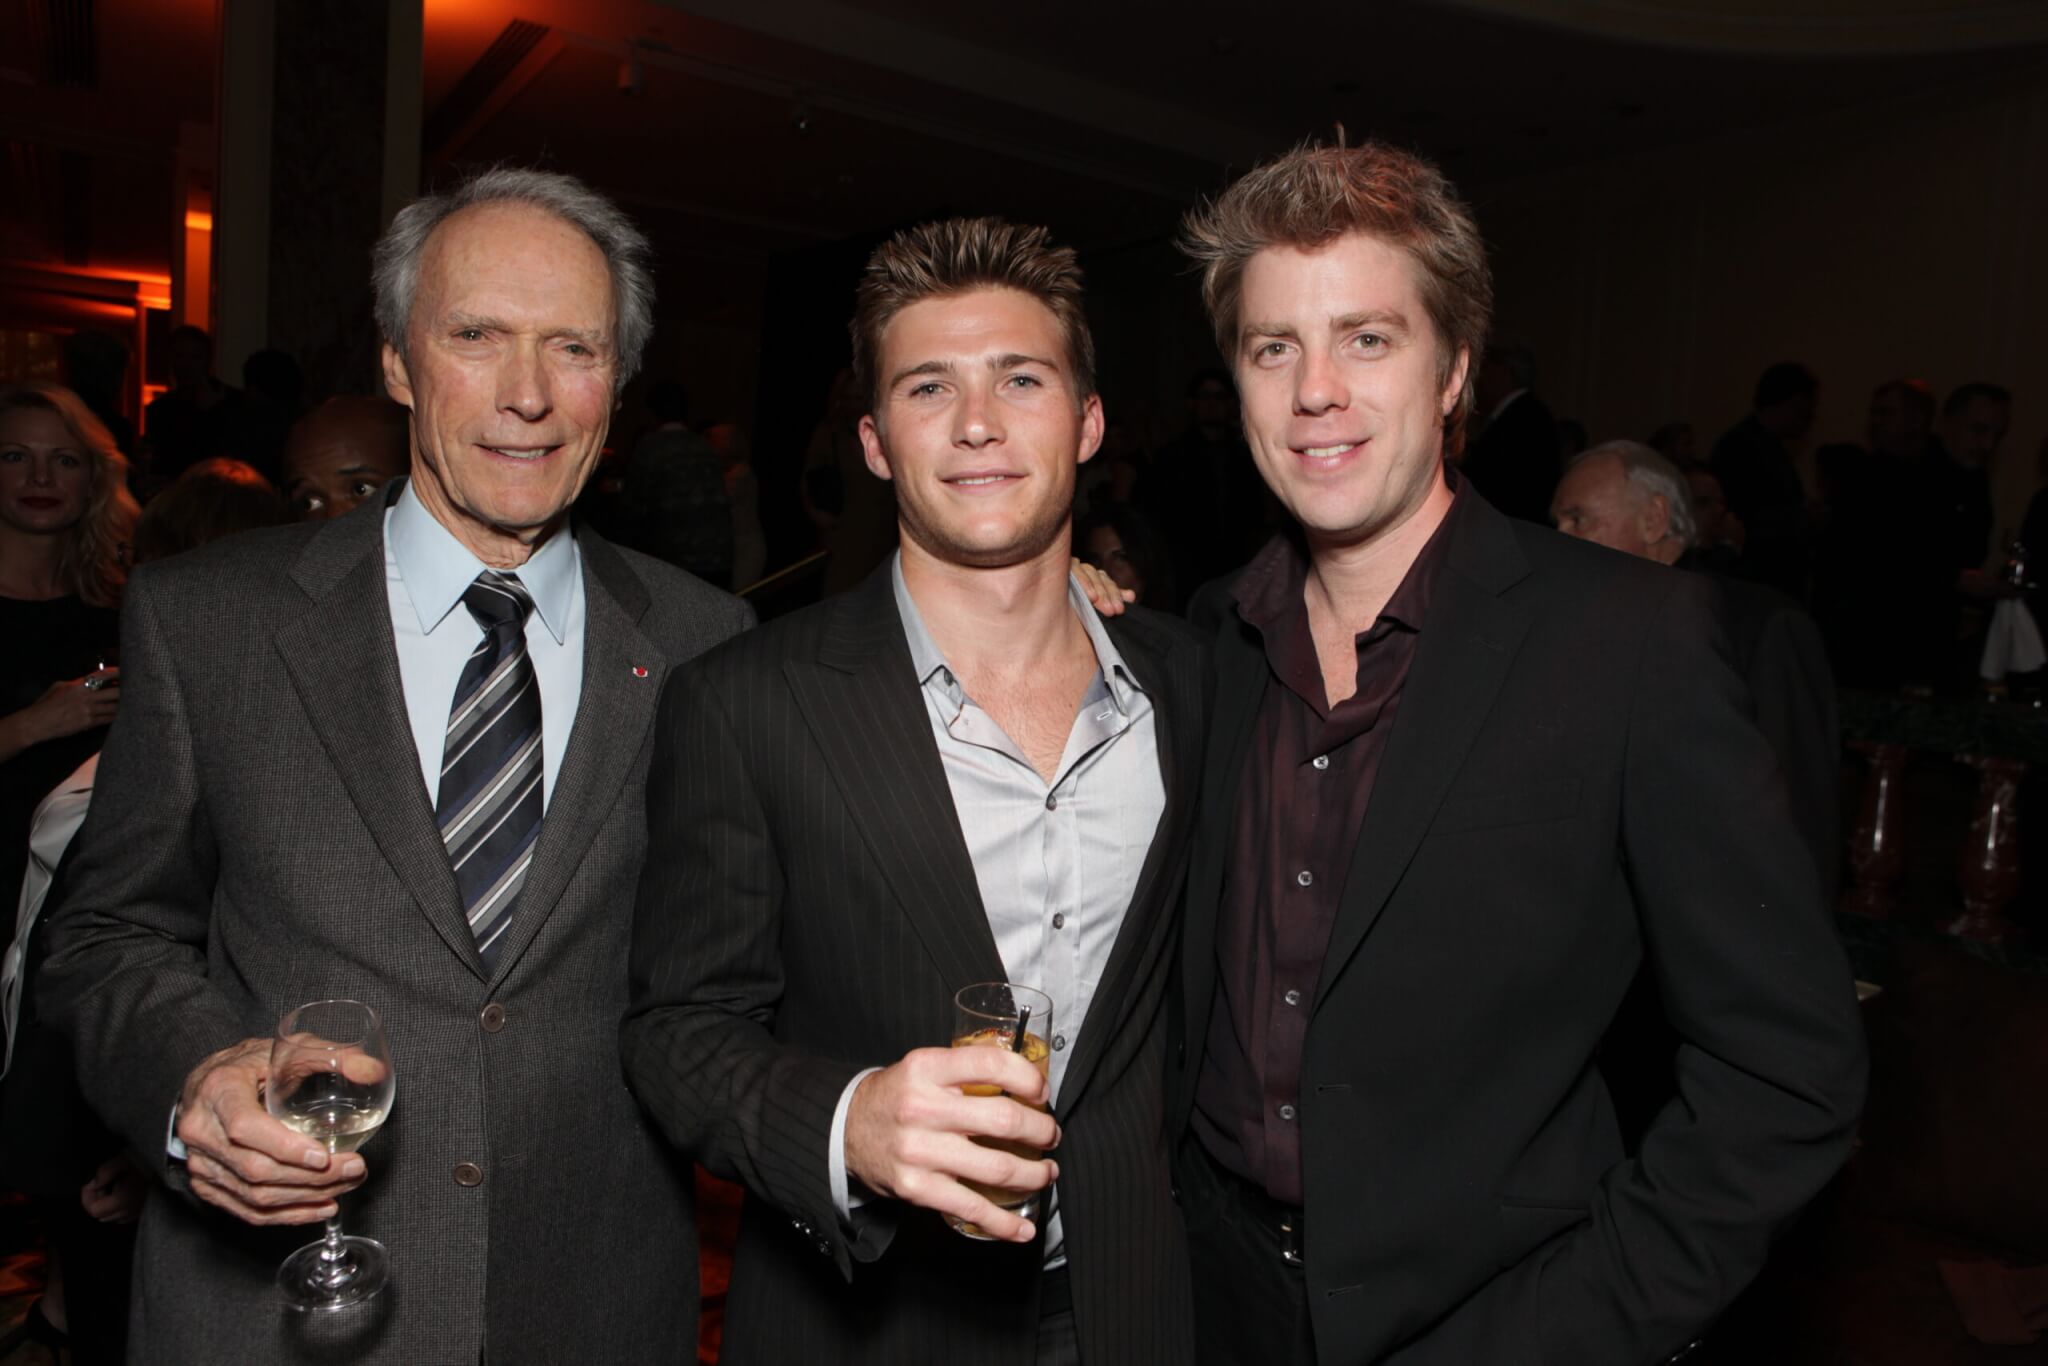 BEVERLY HILLS, CA - DECEMBER 03:**EXCLUSIVE** Director Clint Eastwood, Scott Eastwood and Kyle Eastwood at Warner Bros. Pictures Los Angeles Premiere of 'Invictus' on December 03, 2009 at the Academy of Motion Picture Arts & Sciences in Beverly Hills, California. 